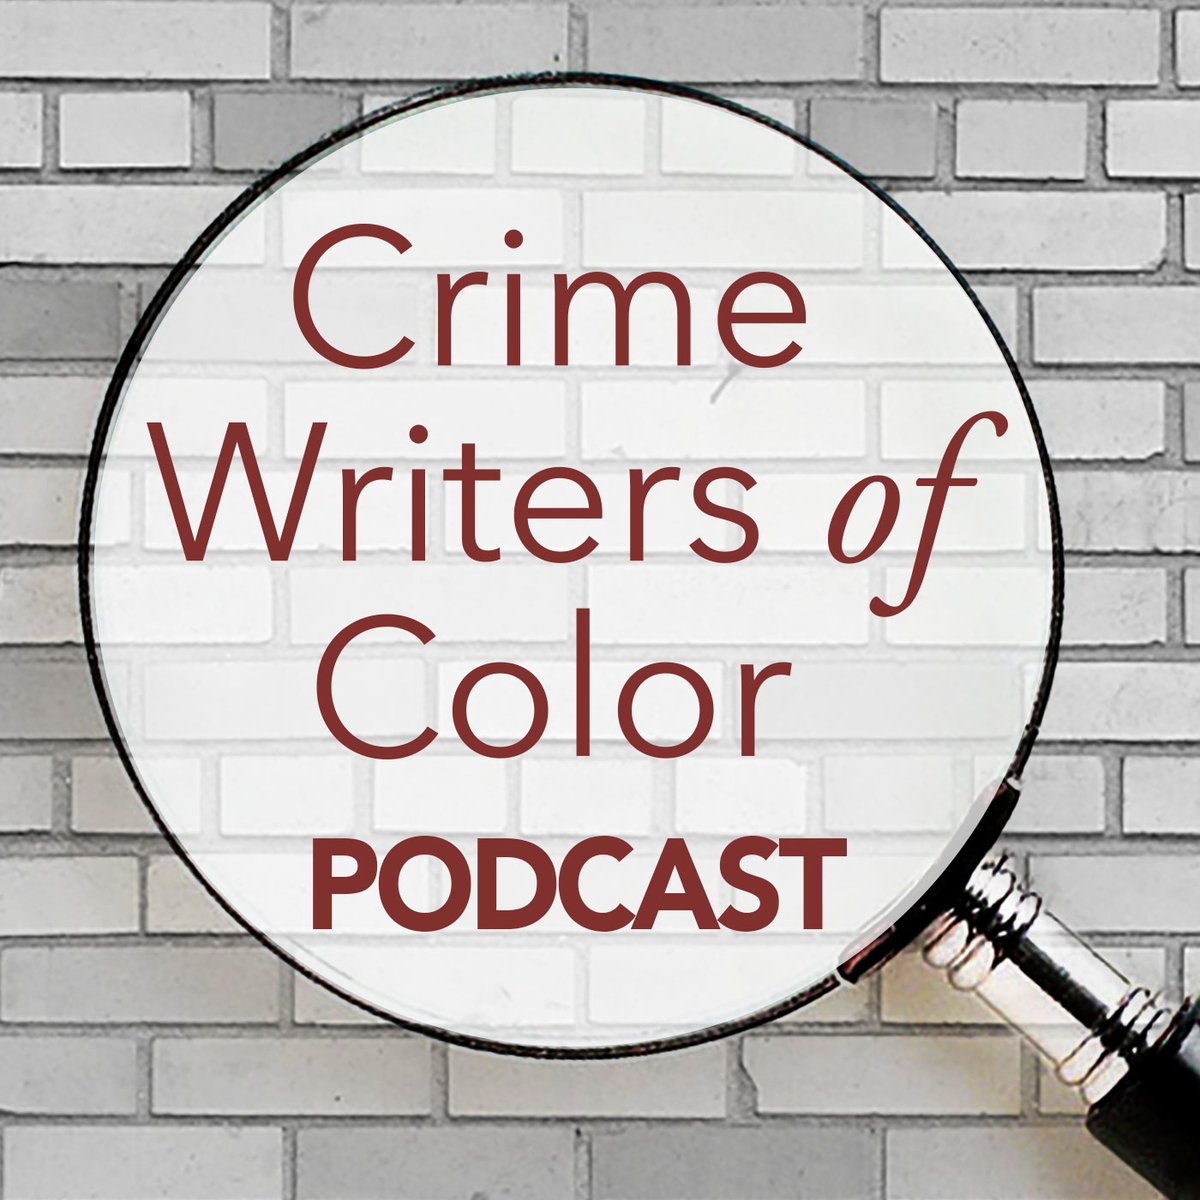 We want to congratulate the amazing @Robert4Justice for 4 years of hosting our author podcast! If you haven't checked it out yet, give it a listen! crimewritersofcolor.com/podcast